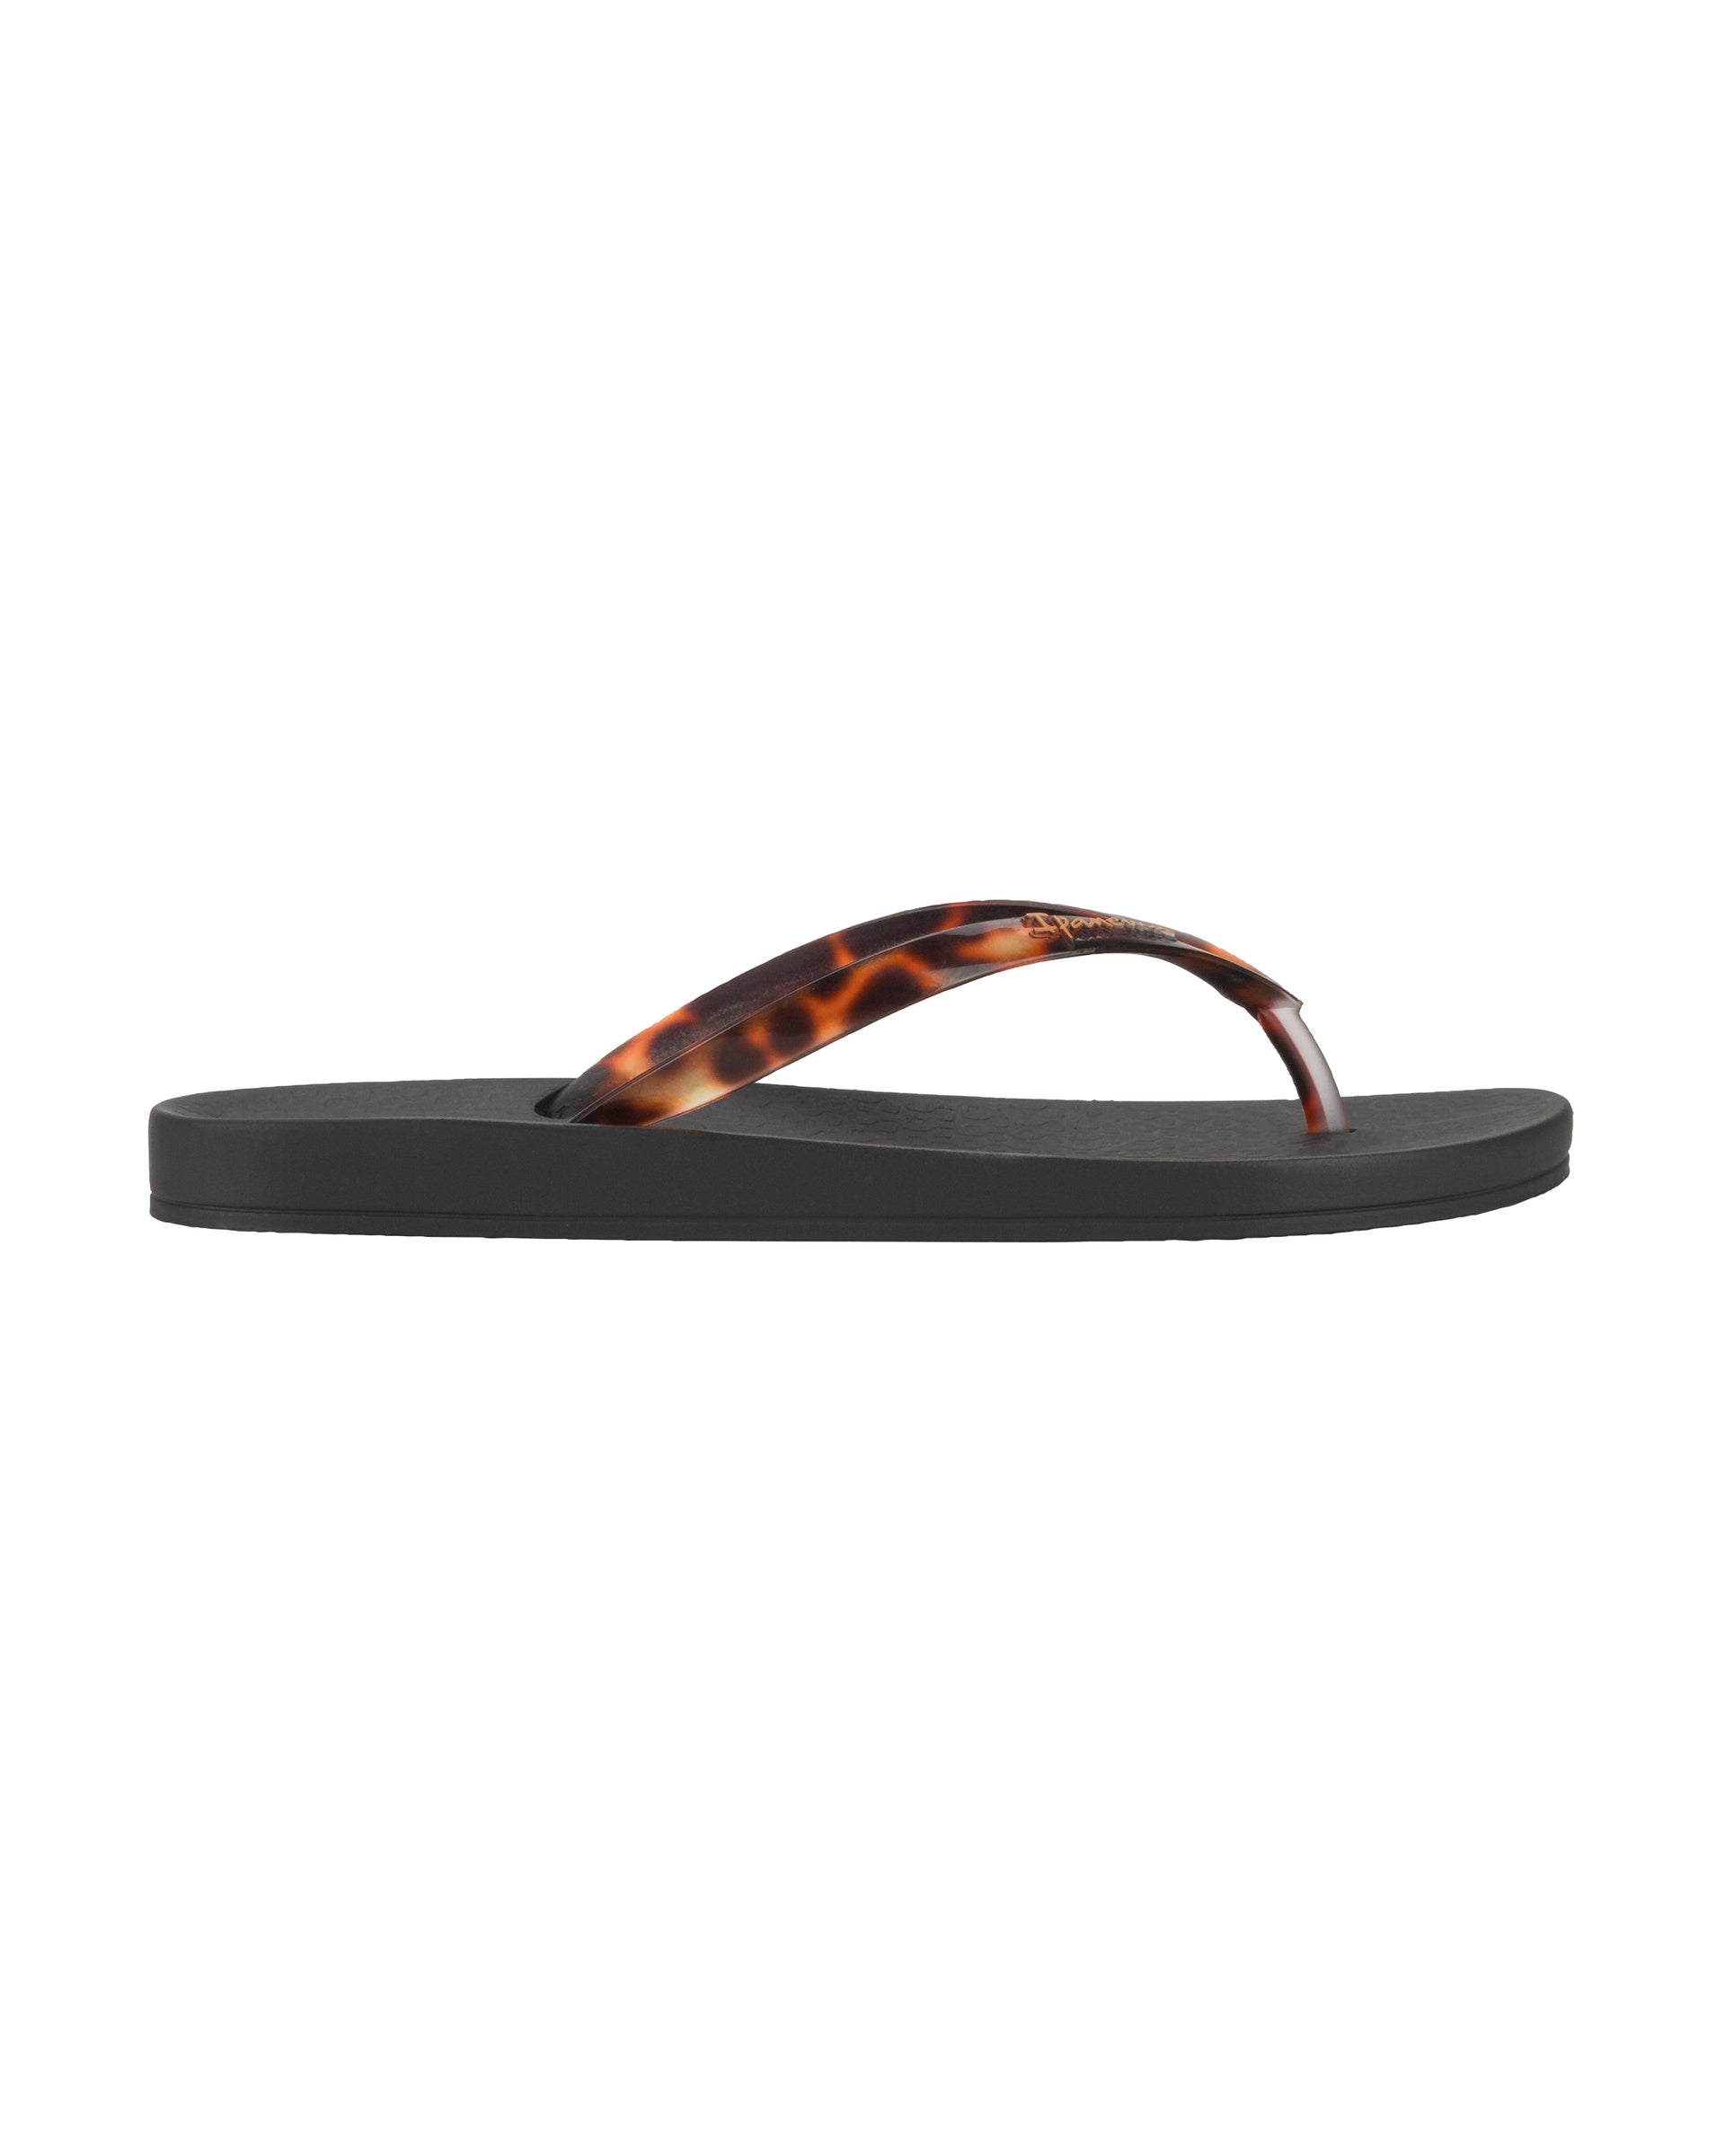 Outer side view of a black Ipanema Ana Connect women's flip flop with brown tortoiseshell  color strap.